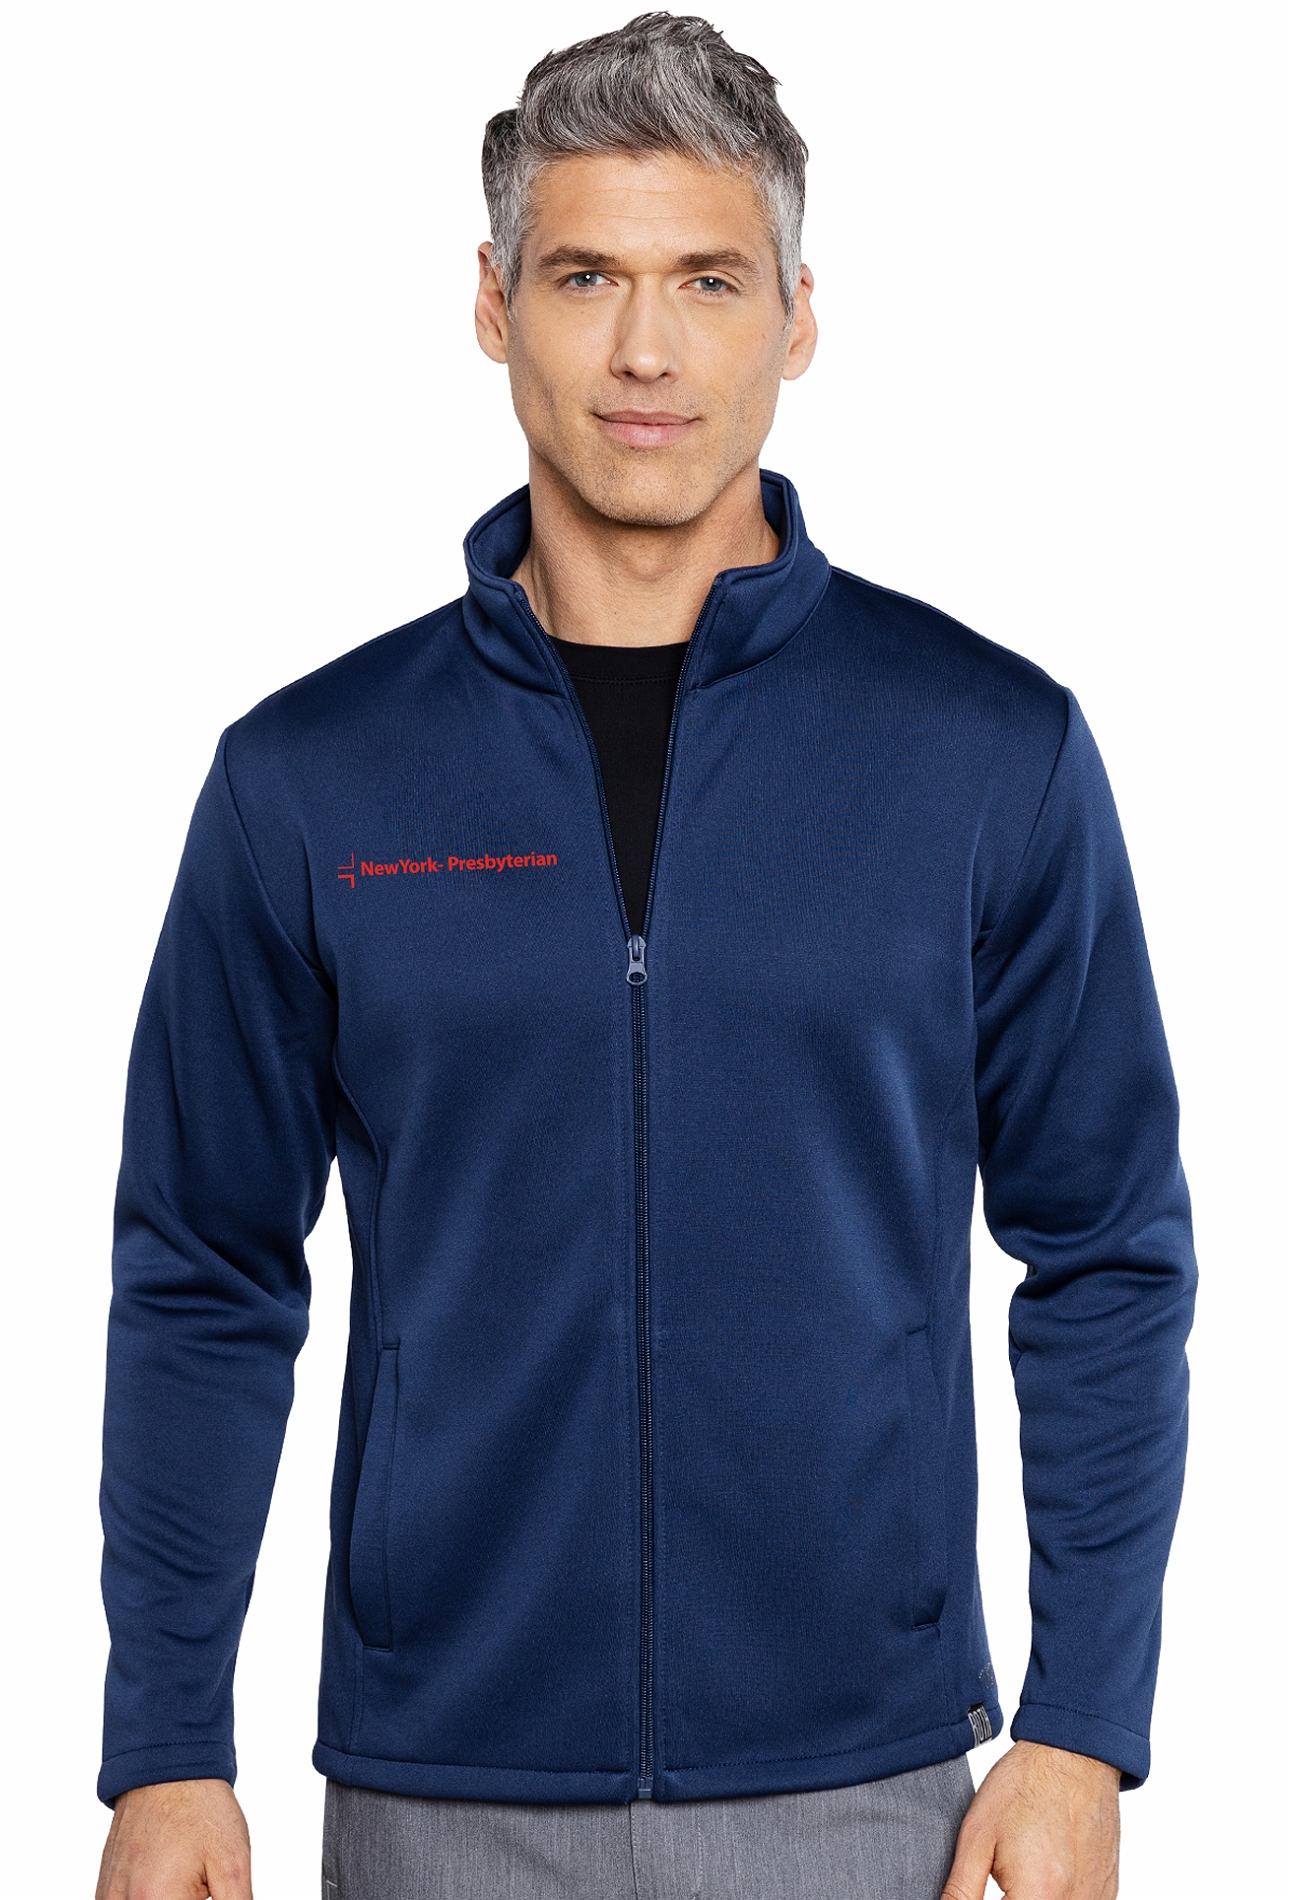 https://medicalscrubscollection.com/content/images/thumbs/0688992_med-couture-activate-mens-bonded-fleece-zip-up-warm-up-scrub-jacket-8688-navy-medium.jpeg